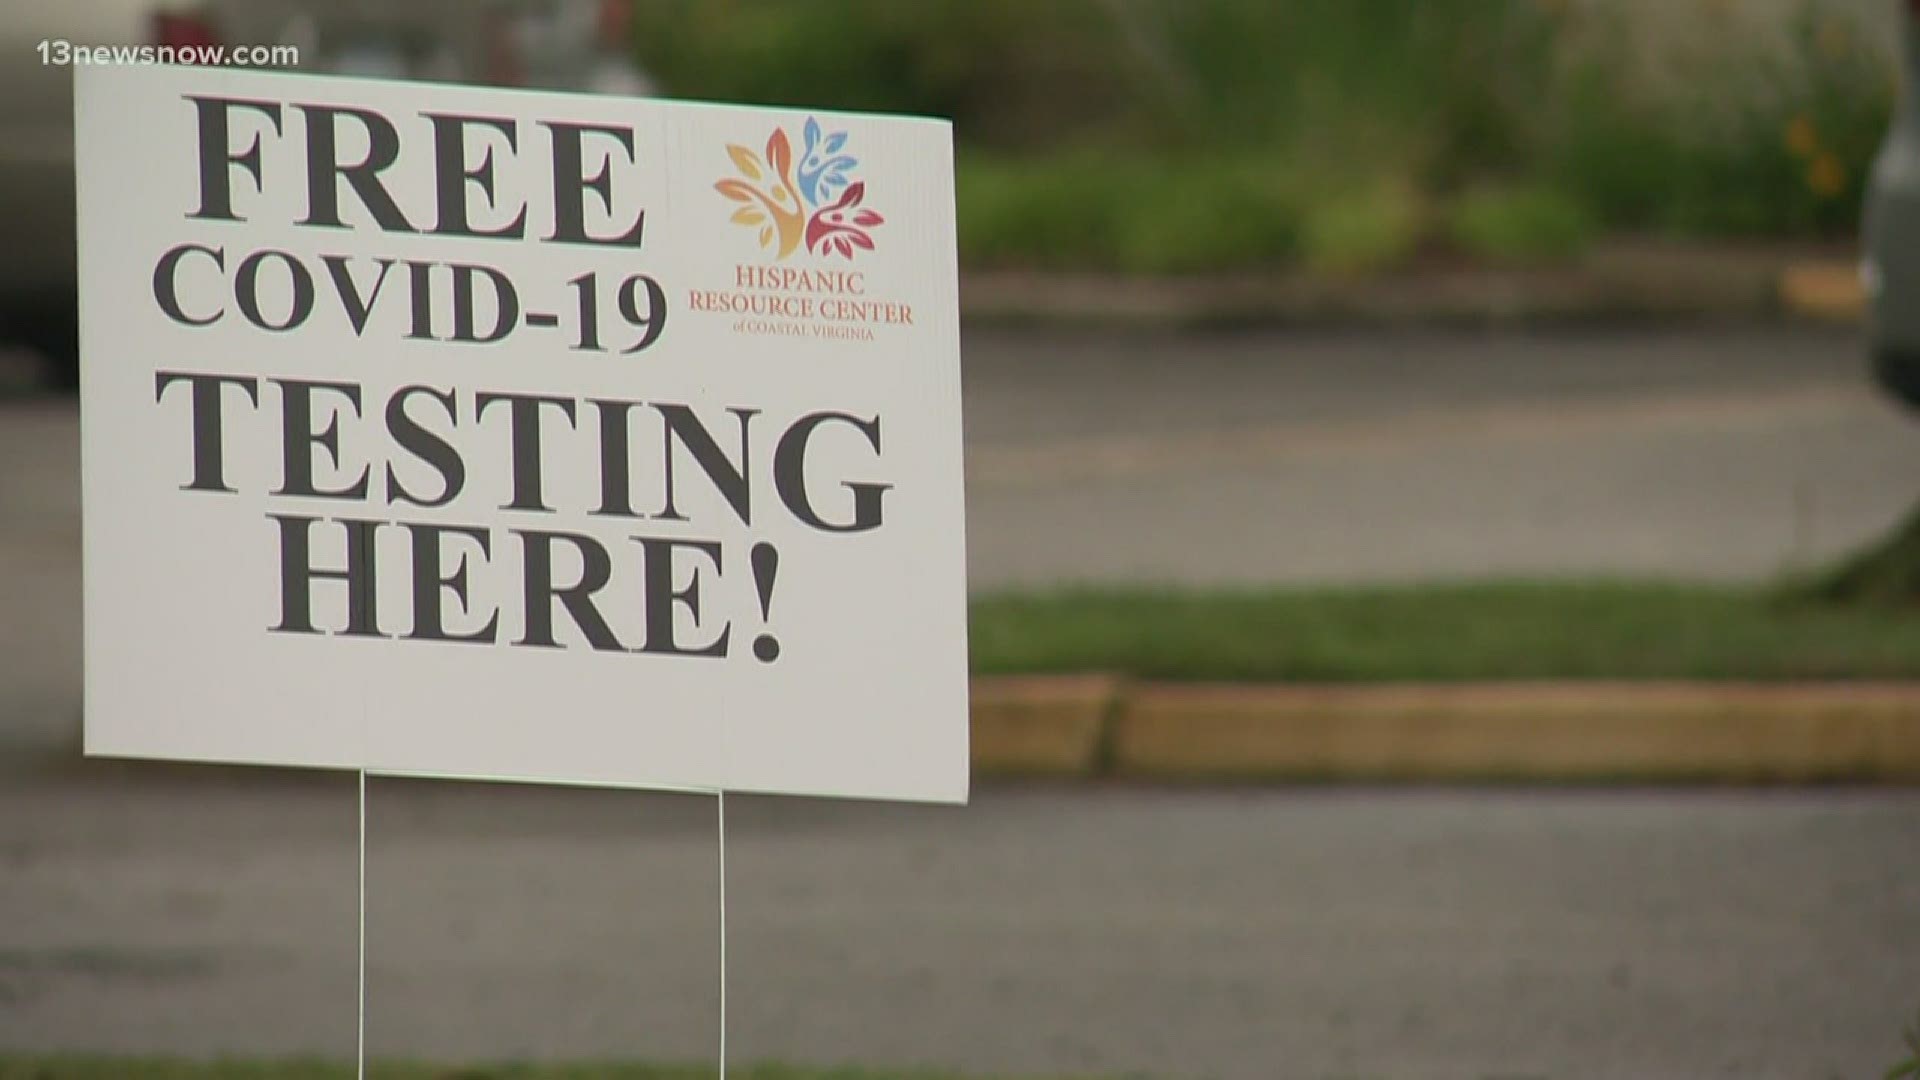 Sentara Healthcare partnered with local organizations and health departments to offer free, community coronavirus testing to underserved people in the area.